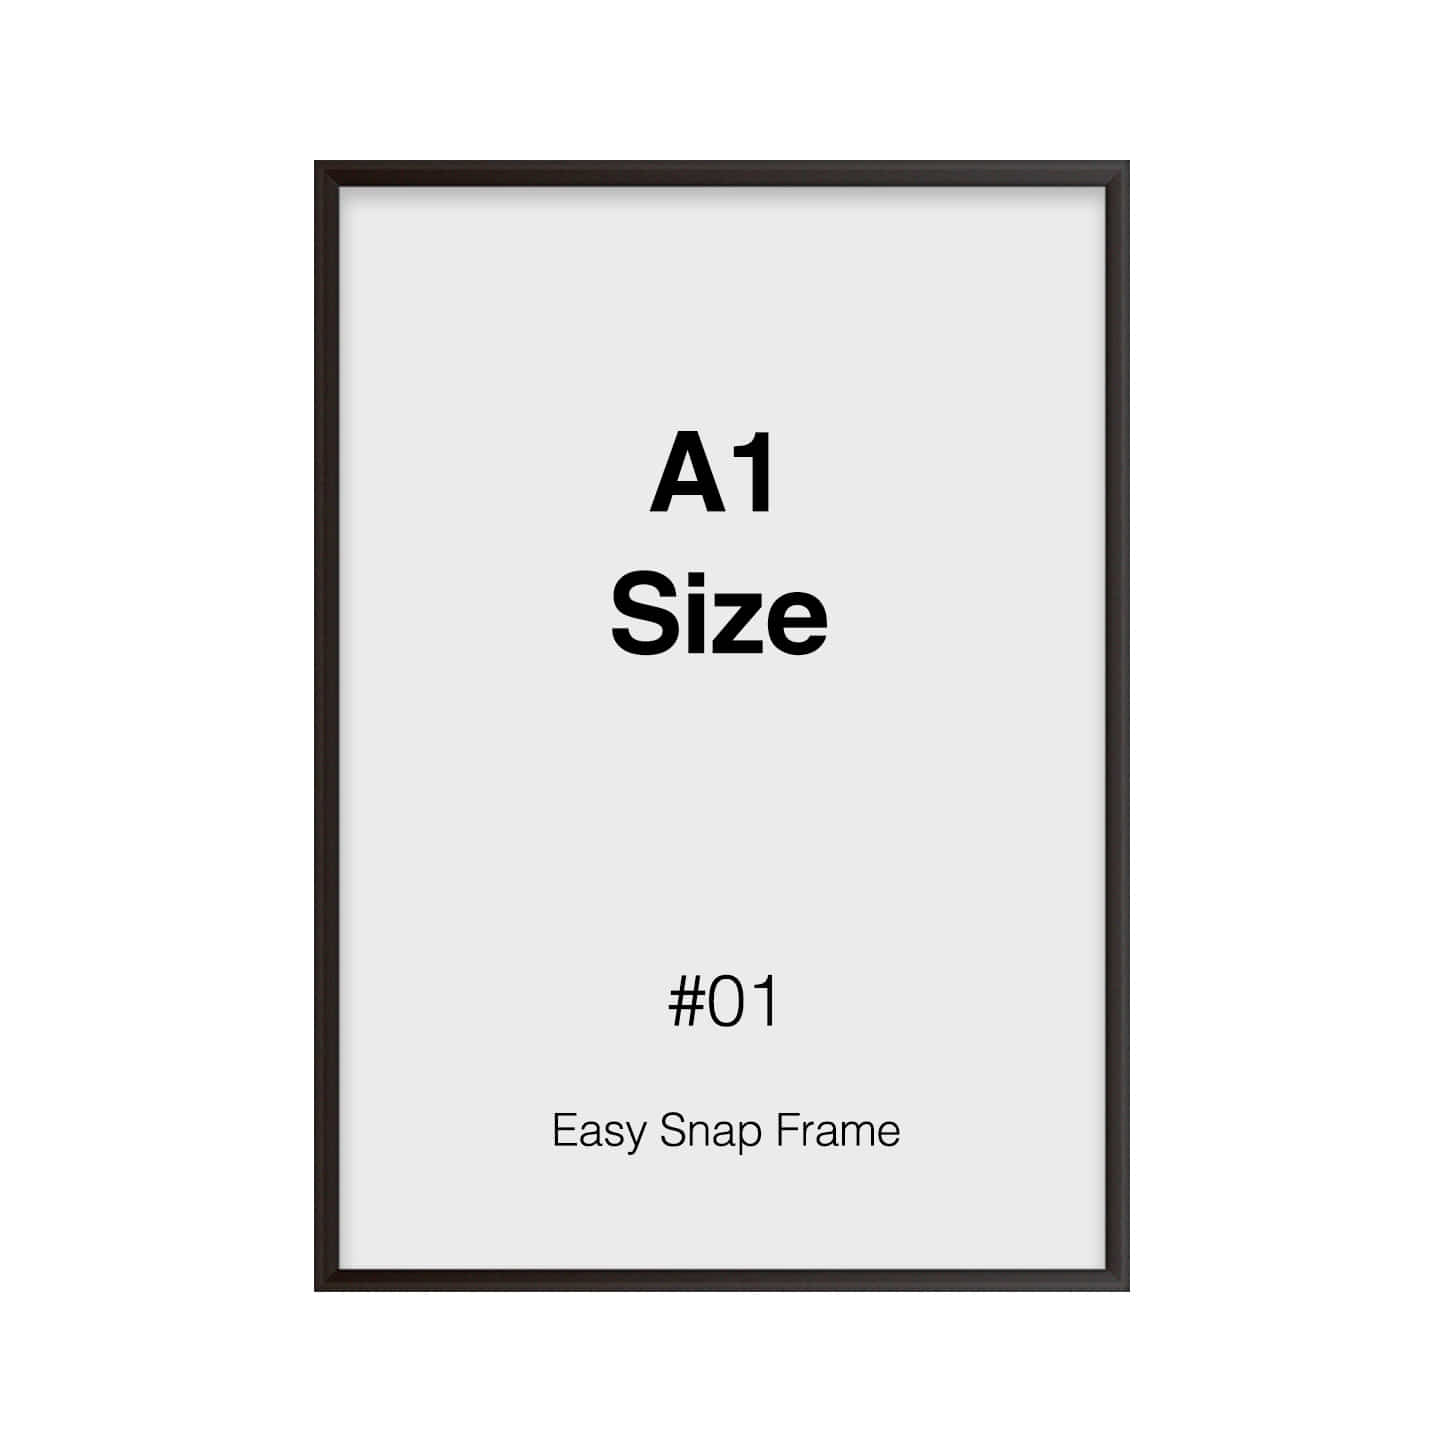 Easy Snap Frame - A1 Size